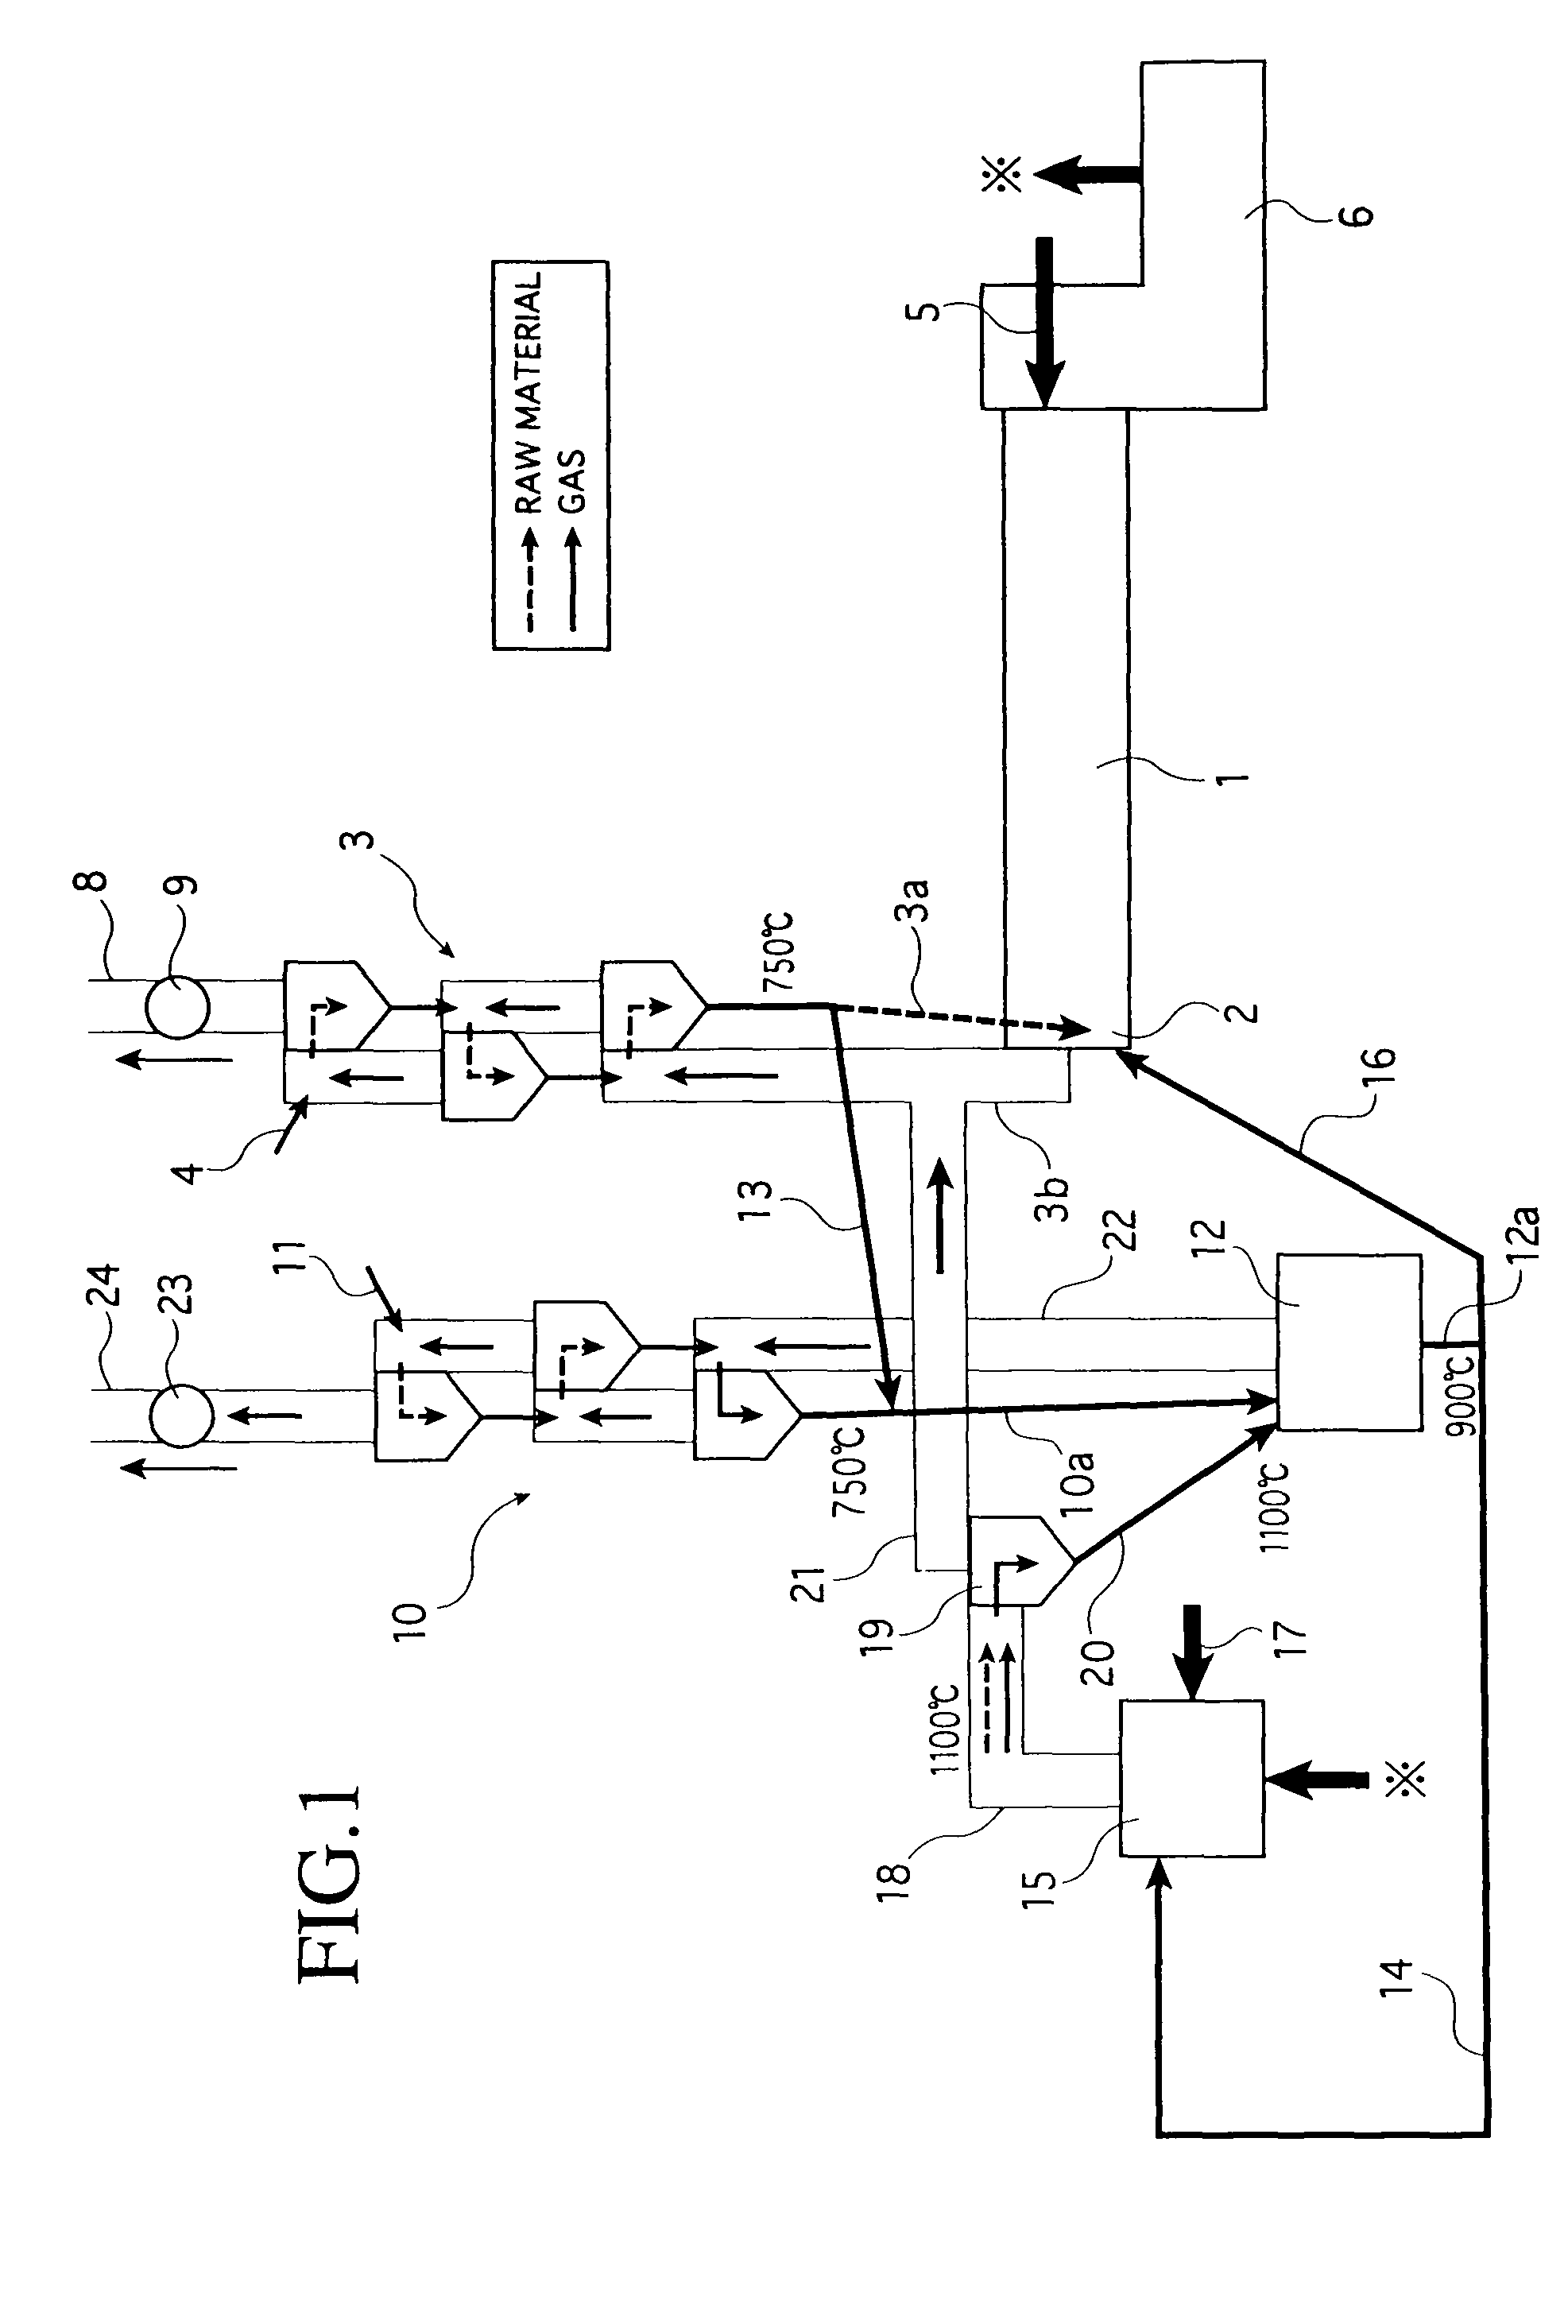 Method and facility for recovering co2 gas in cement manufacturing facility